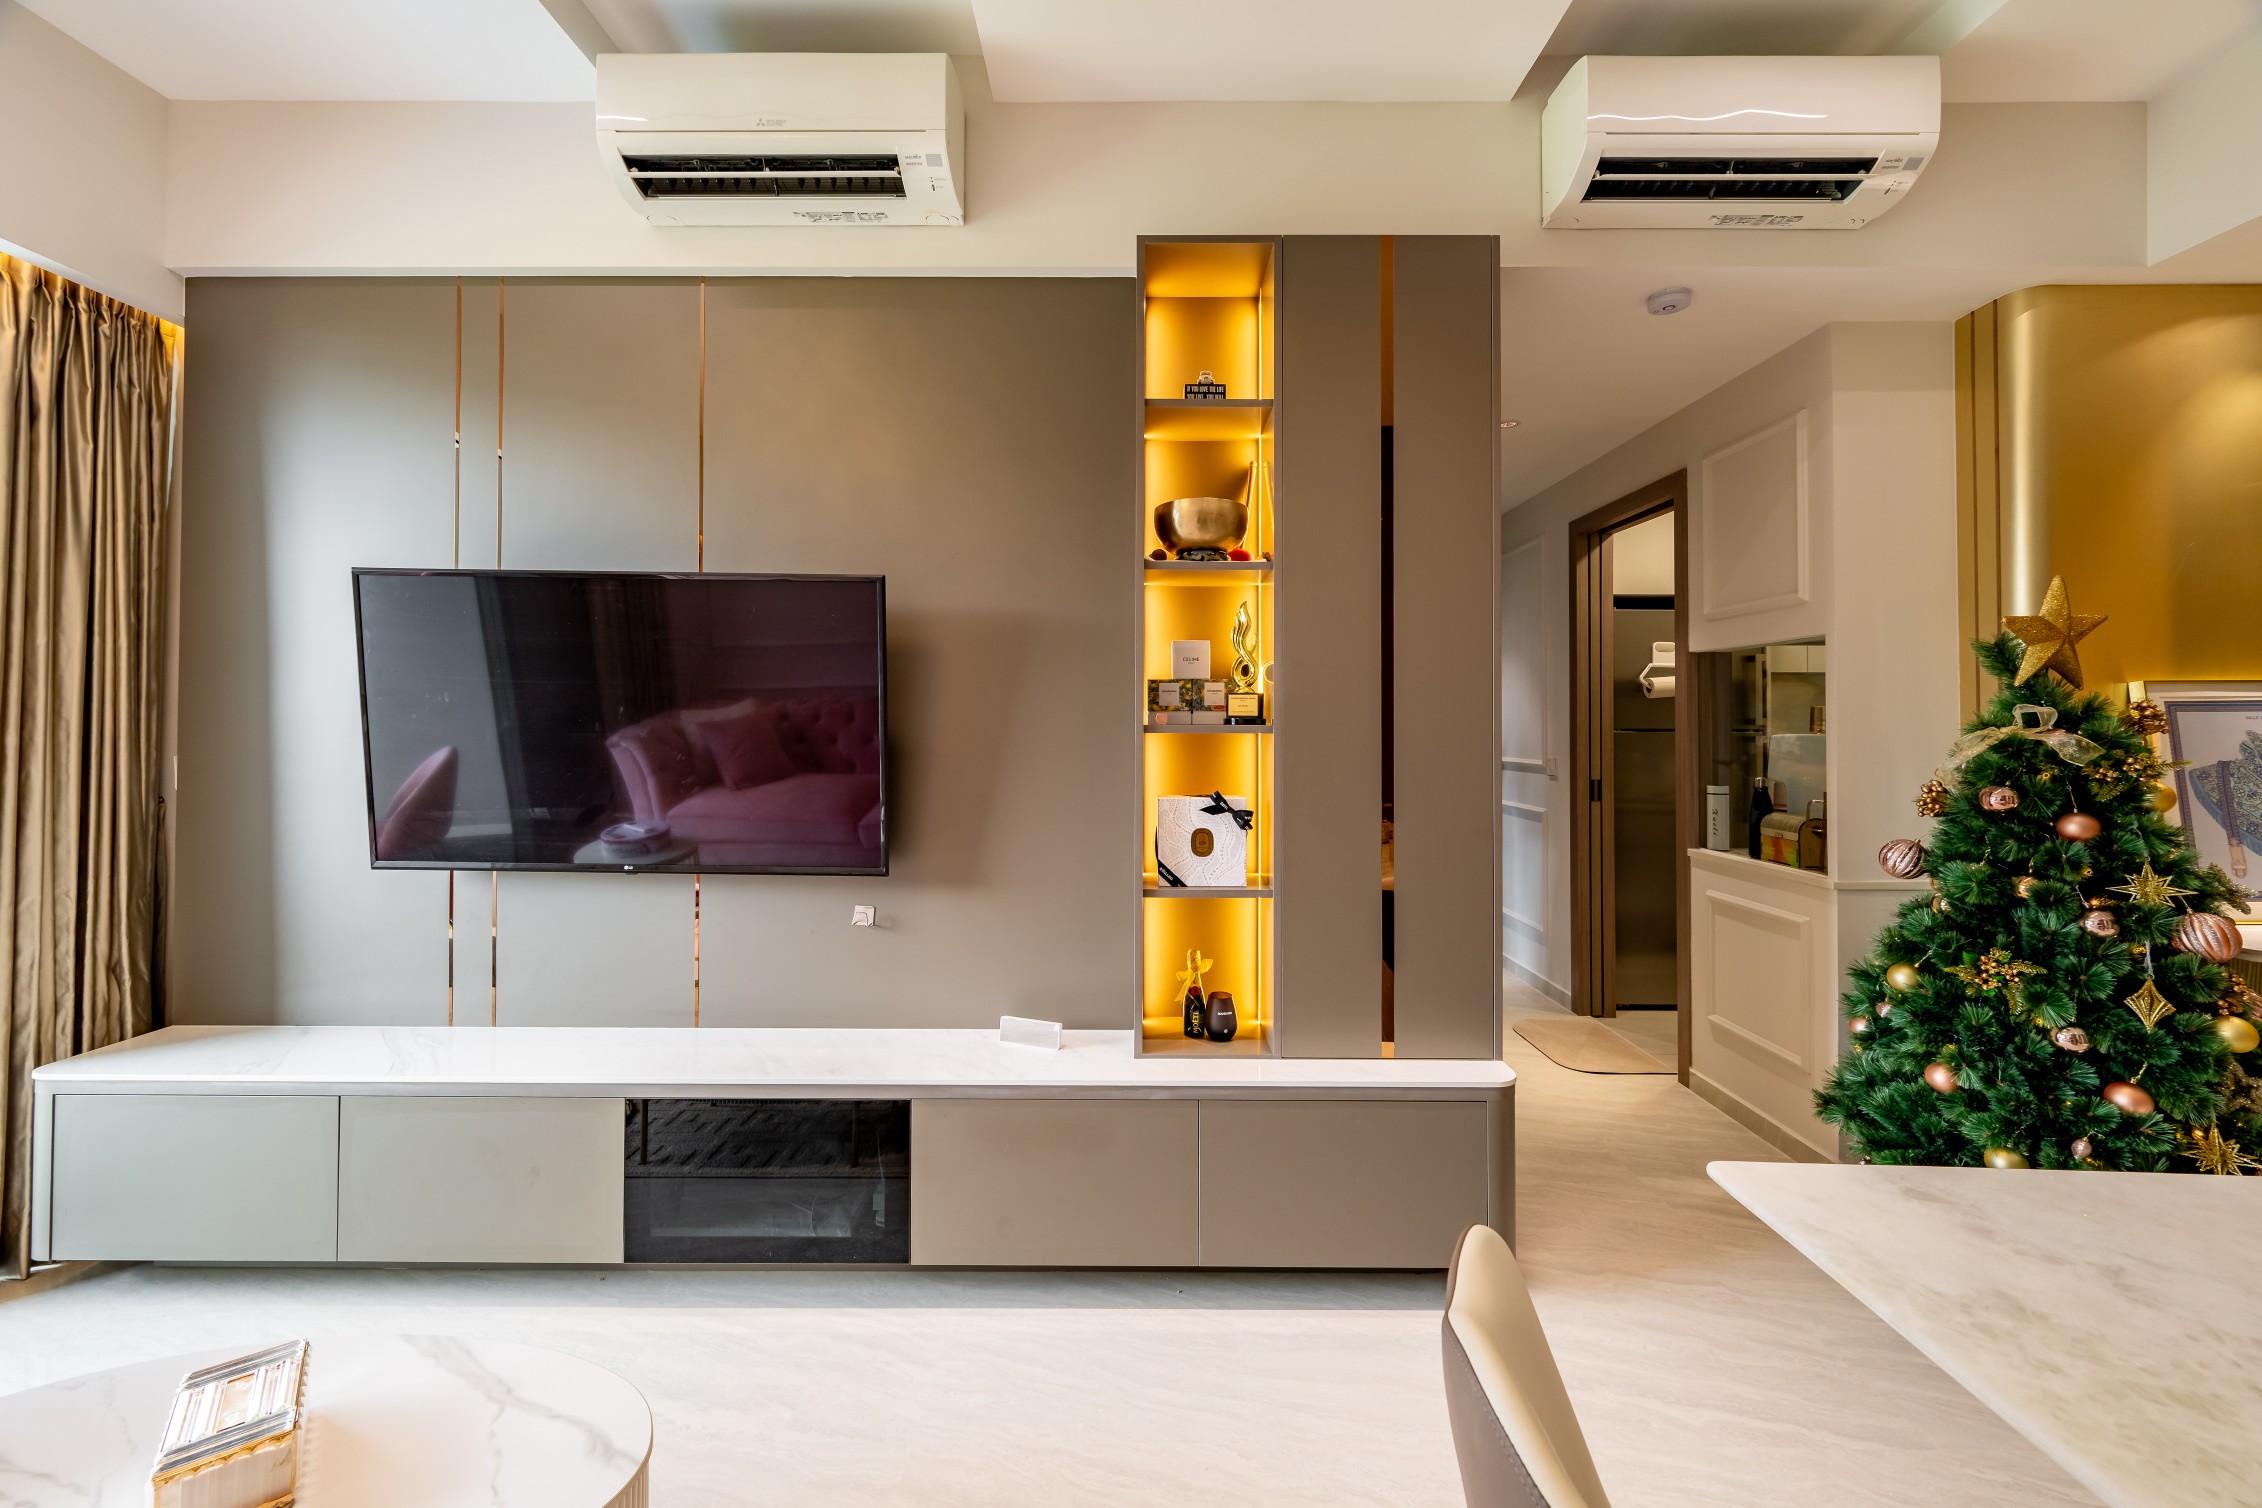 Condo Woodleigh Residences by Stuart Yee